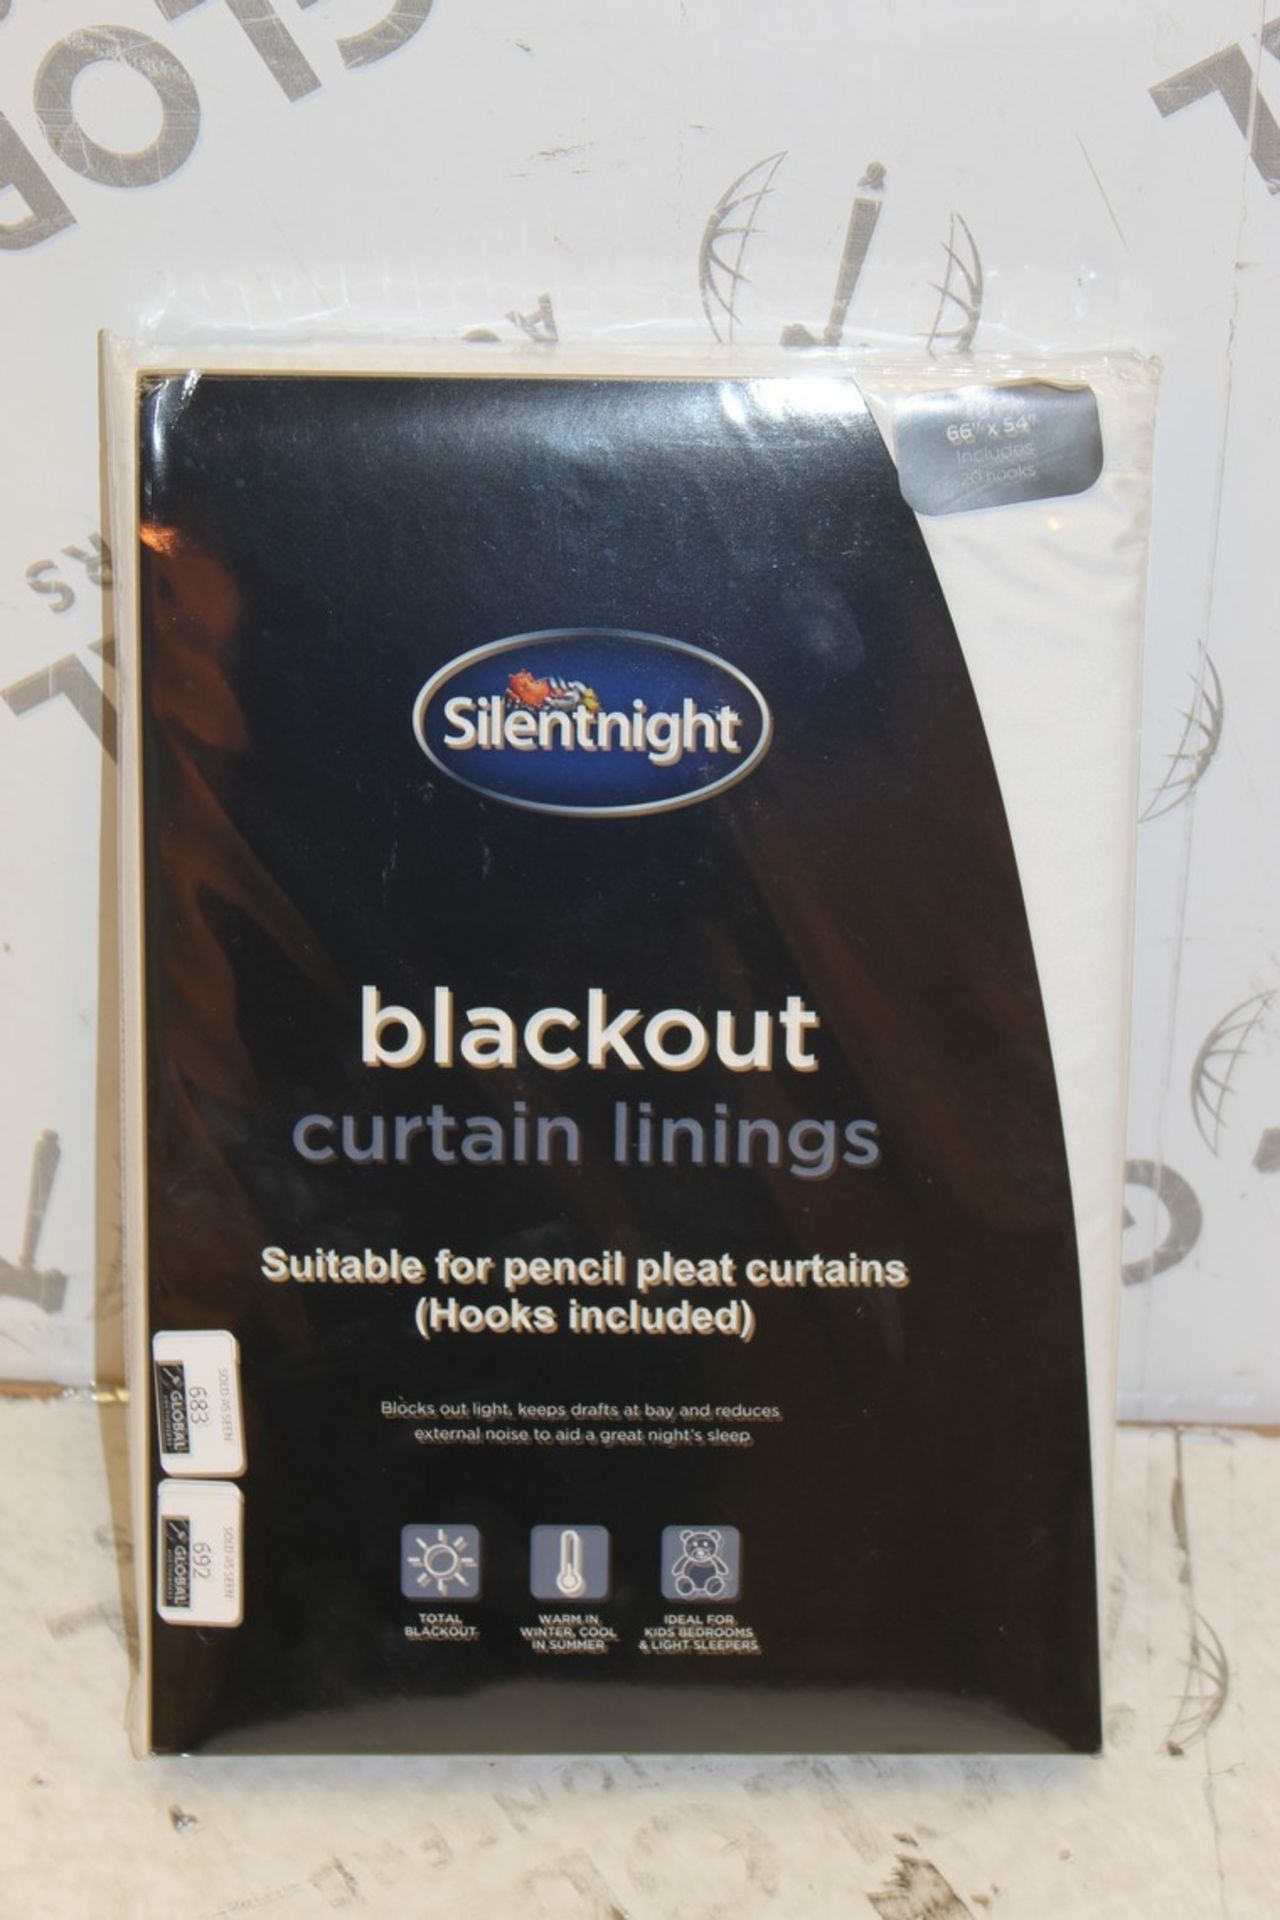 Brand New Pair Of 66x54 Silentnight Curtain Linings RRP £65 (Pictures For Illustration Purposes